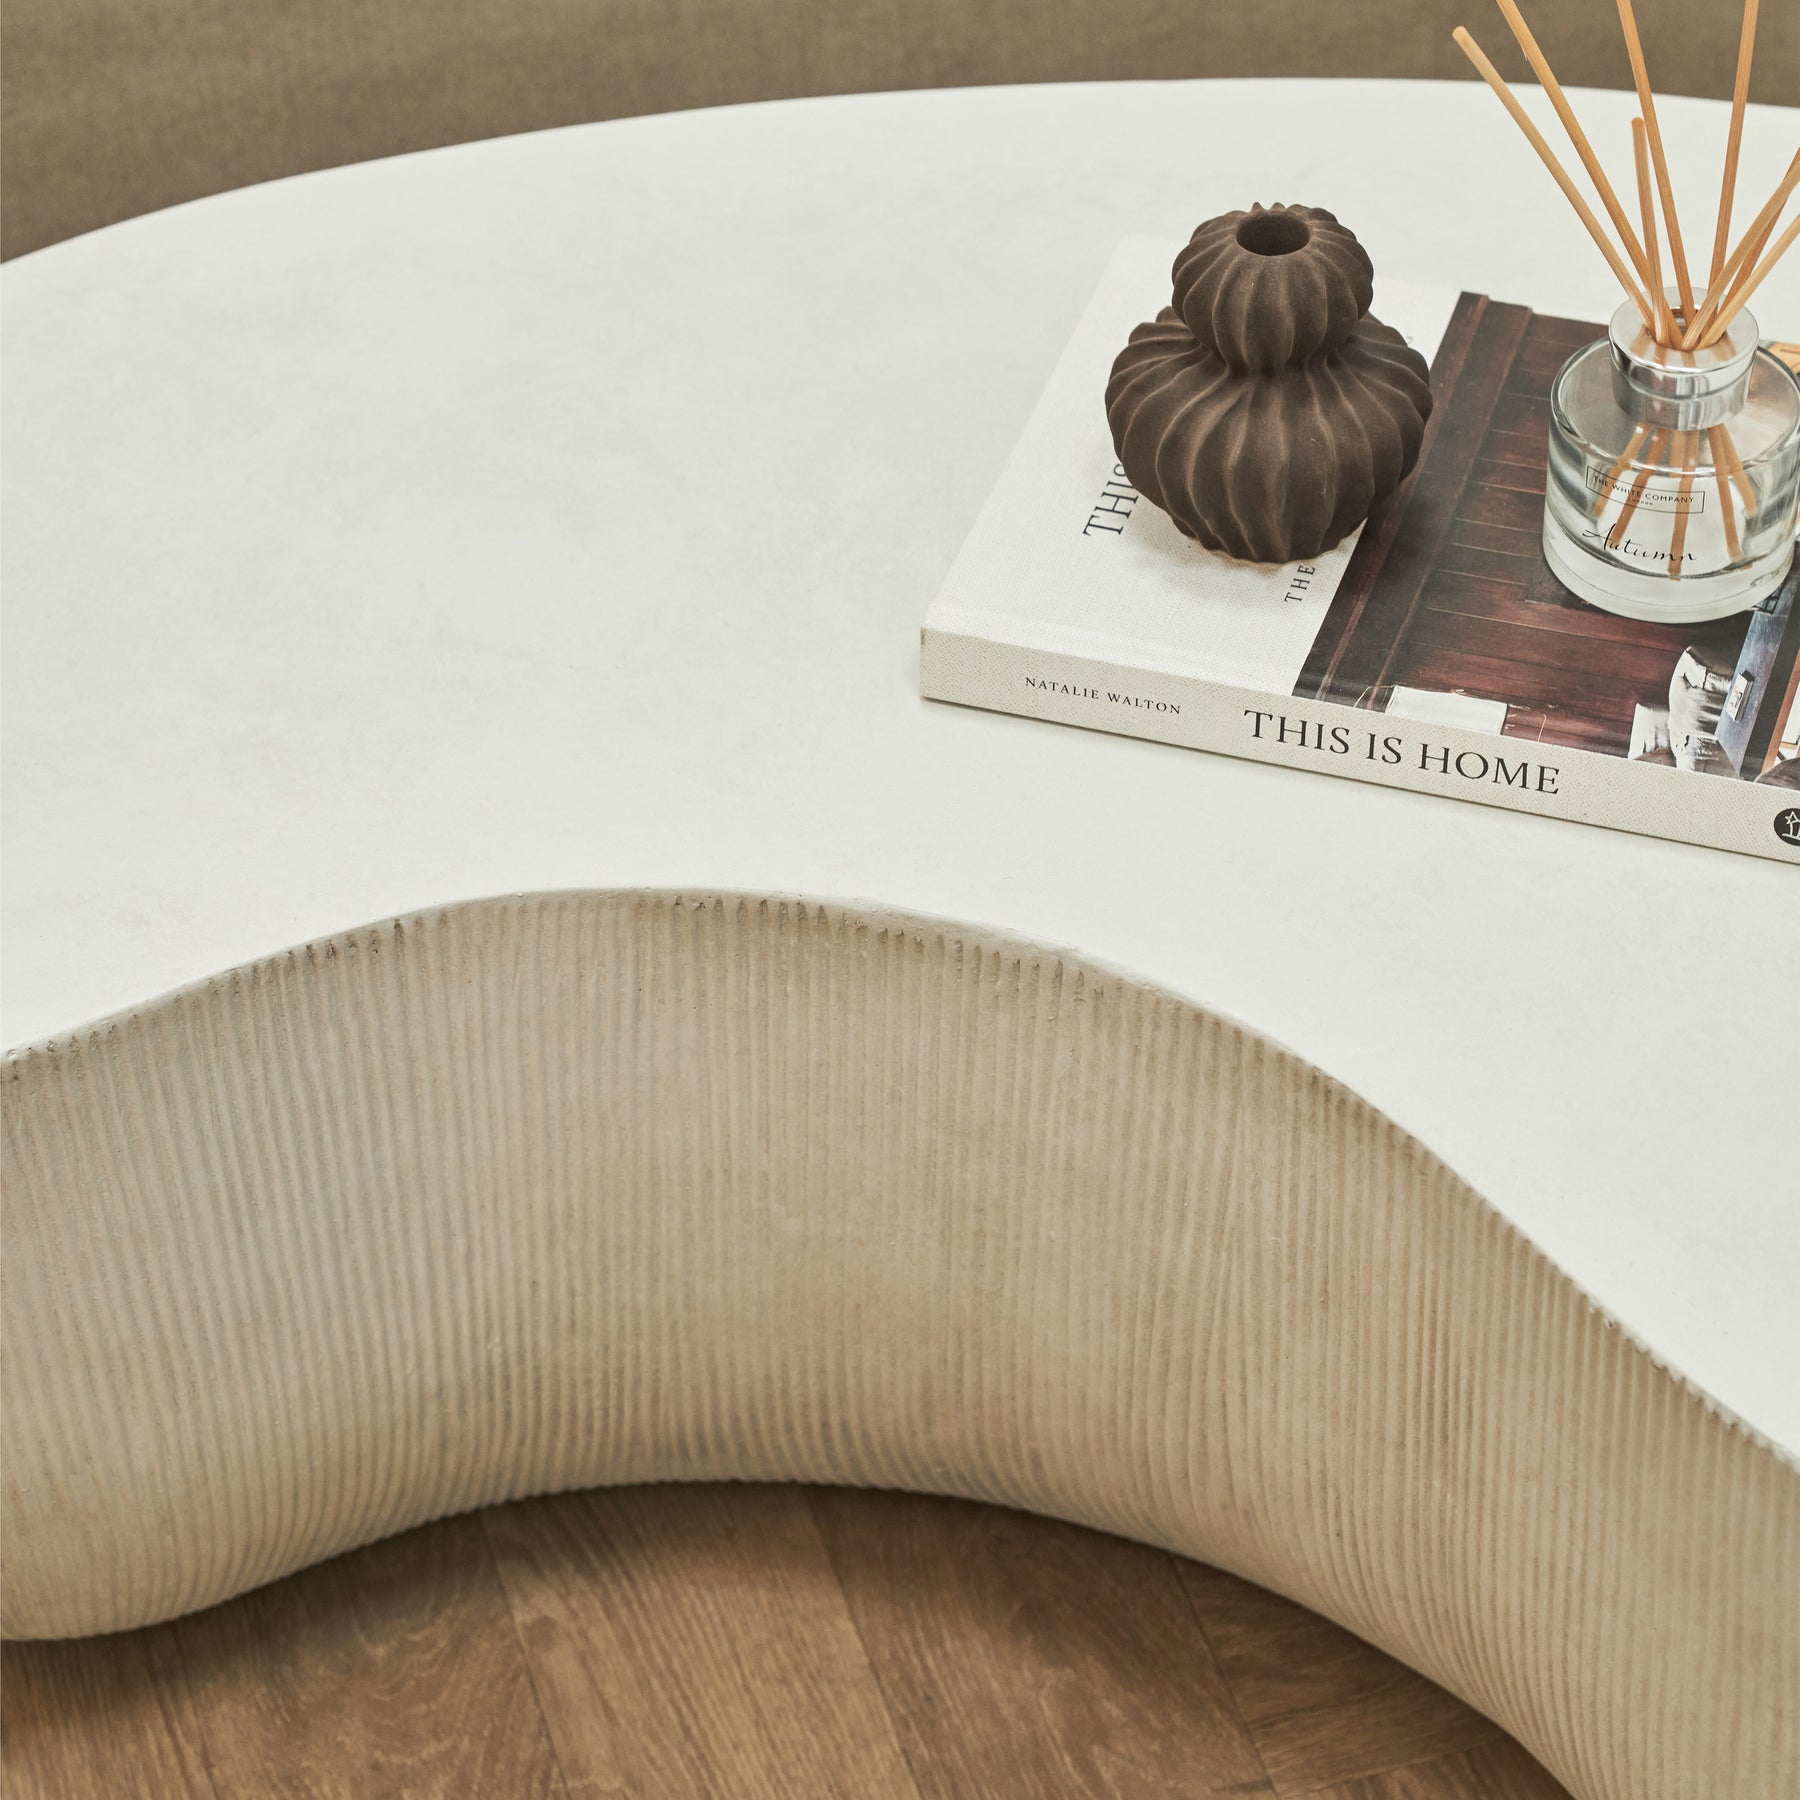 Minimal Concrete Shaped Coffee Table Large adorned with books, incense, and ceramic vase